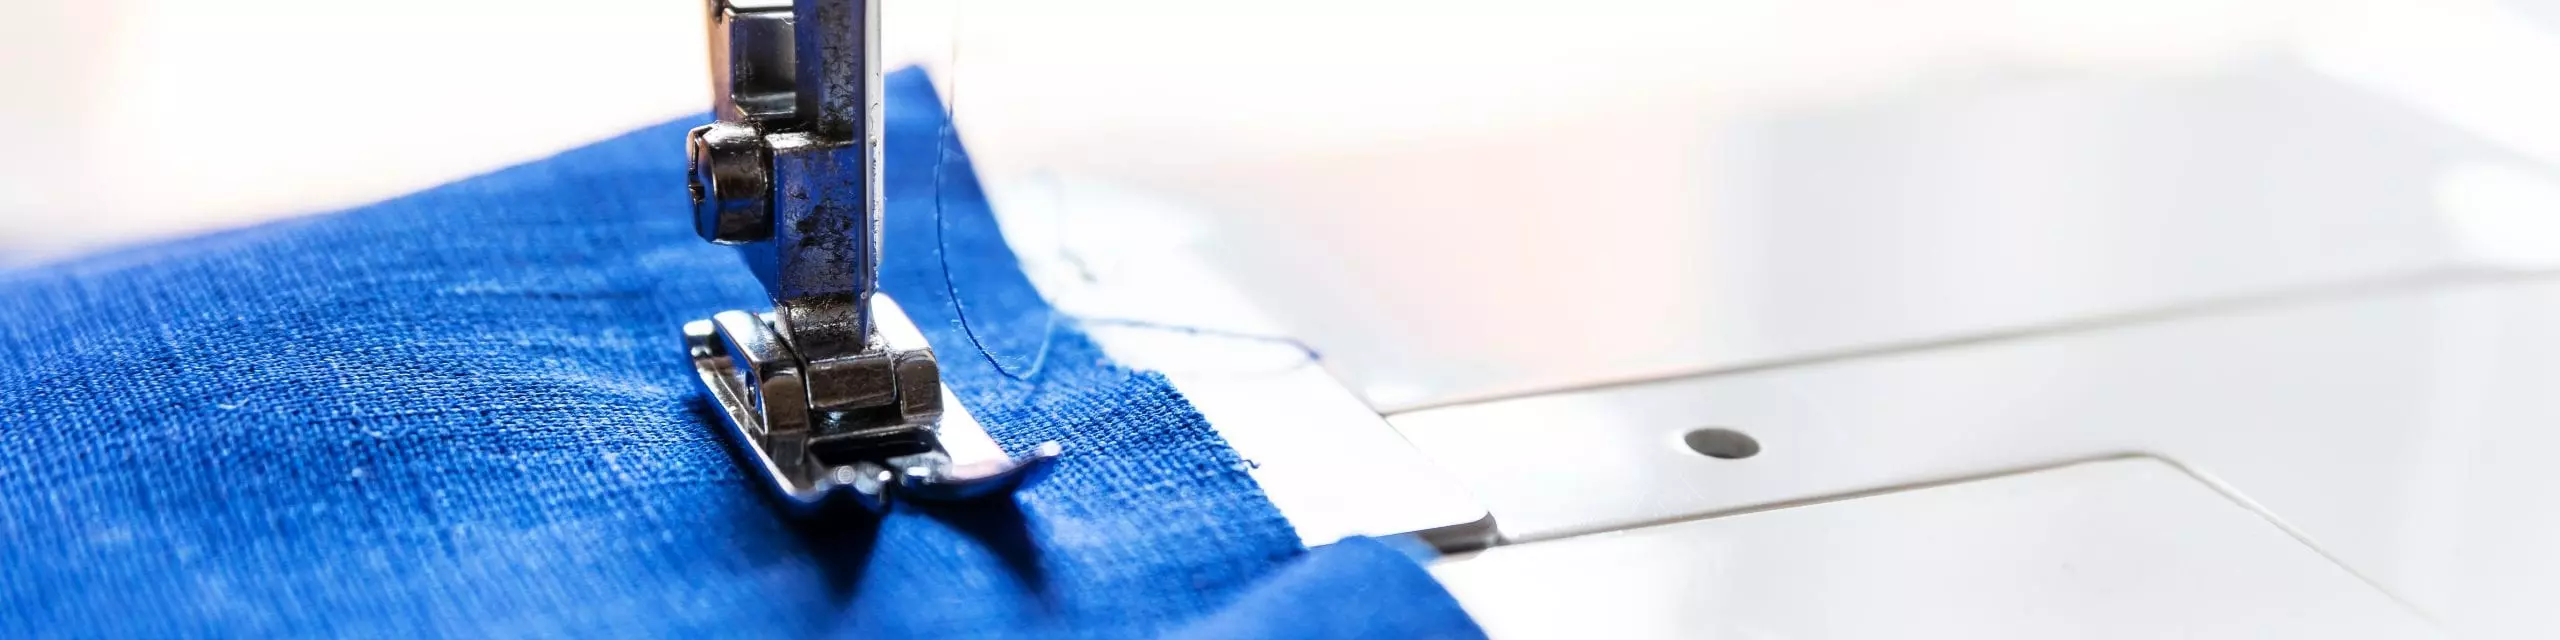 Lean Manufacturing in Clothing Industry: All You Should Know